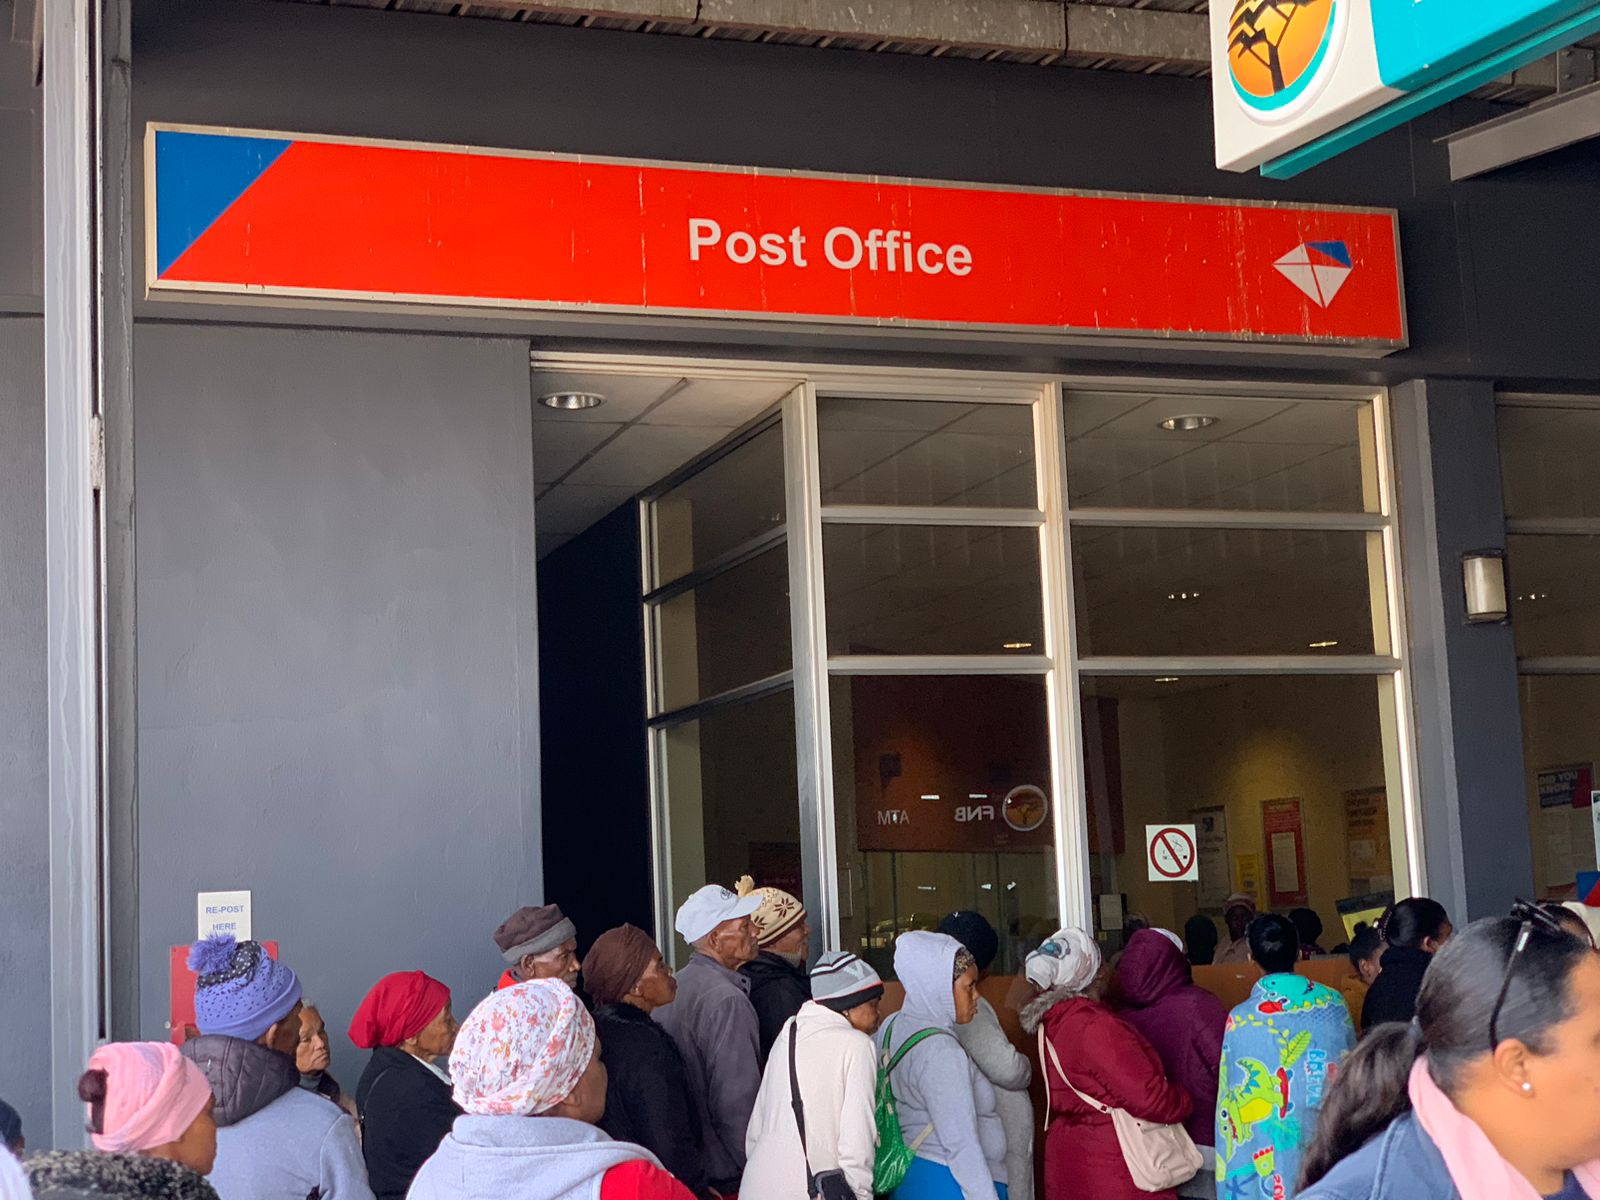 Post Office in Paarl, social grant payments